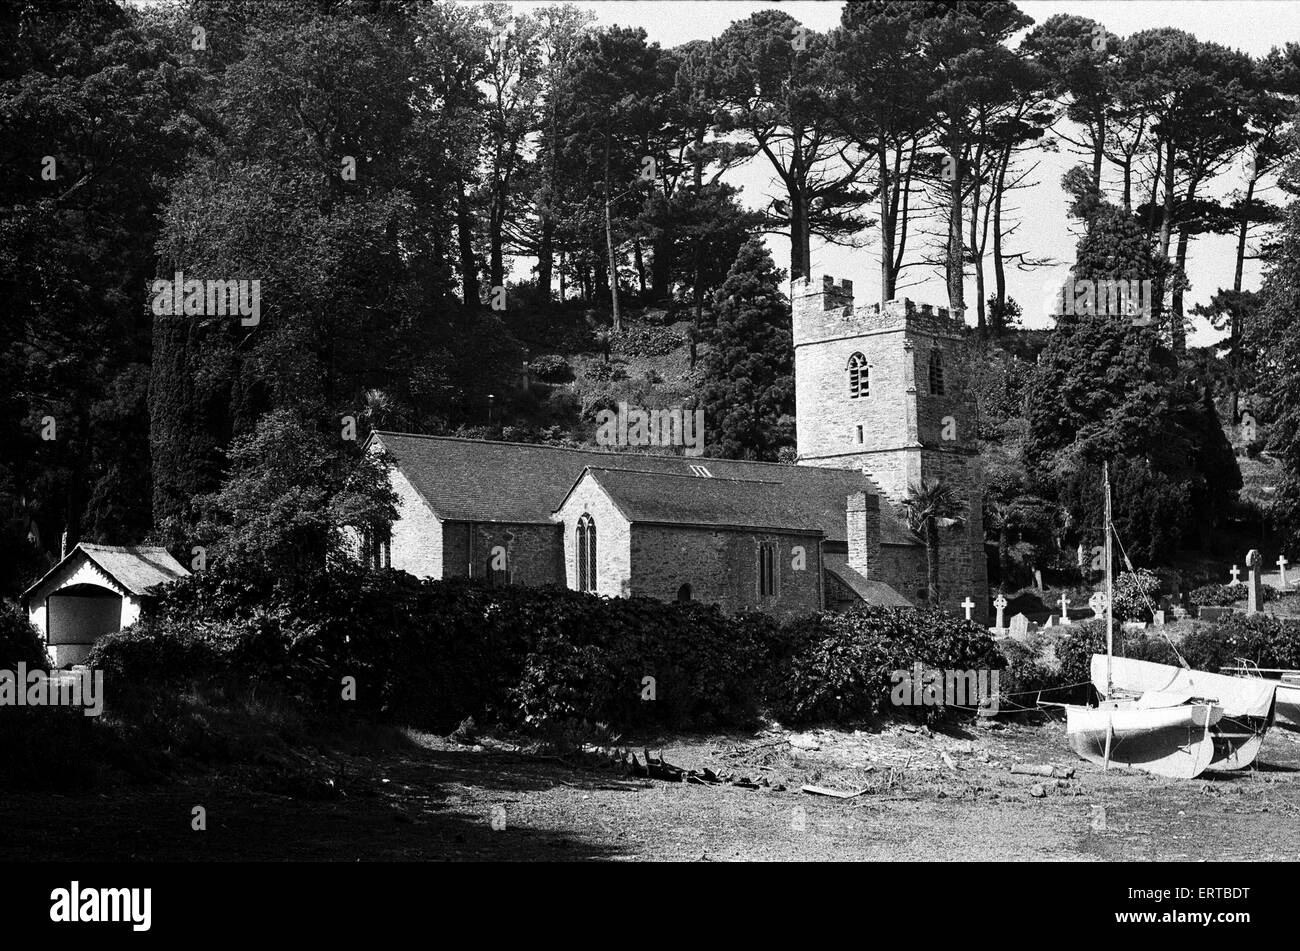 The 13th century St Just in Roseland Church, in St Just in Roseland, Cornwall. The church is set in set in riverside gardens luxuriantly planted with semitropical shrubs and trees, many of which are species rare in England. The village is situated six miles (10 km) south of Truro and two miles (3 km) north of St Mawes. June 1975. Stock Photo